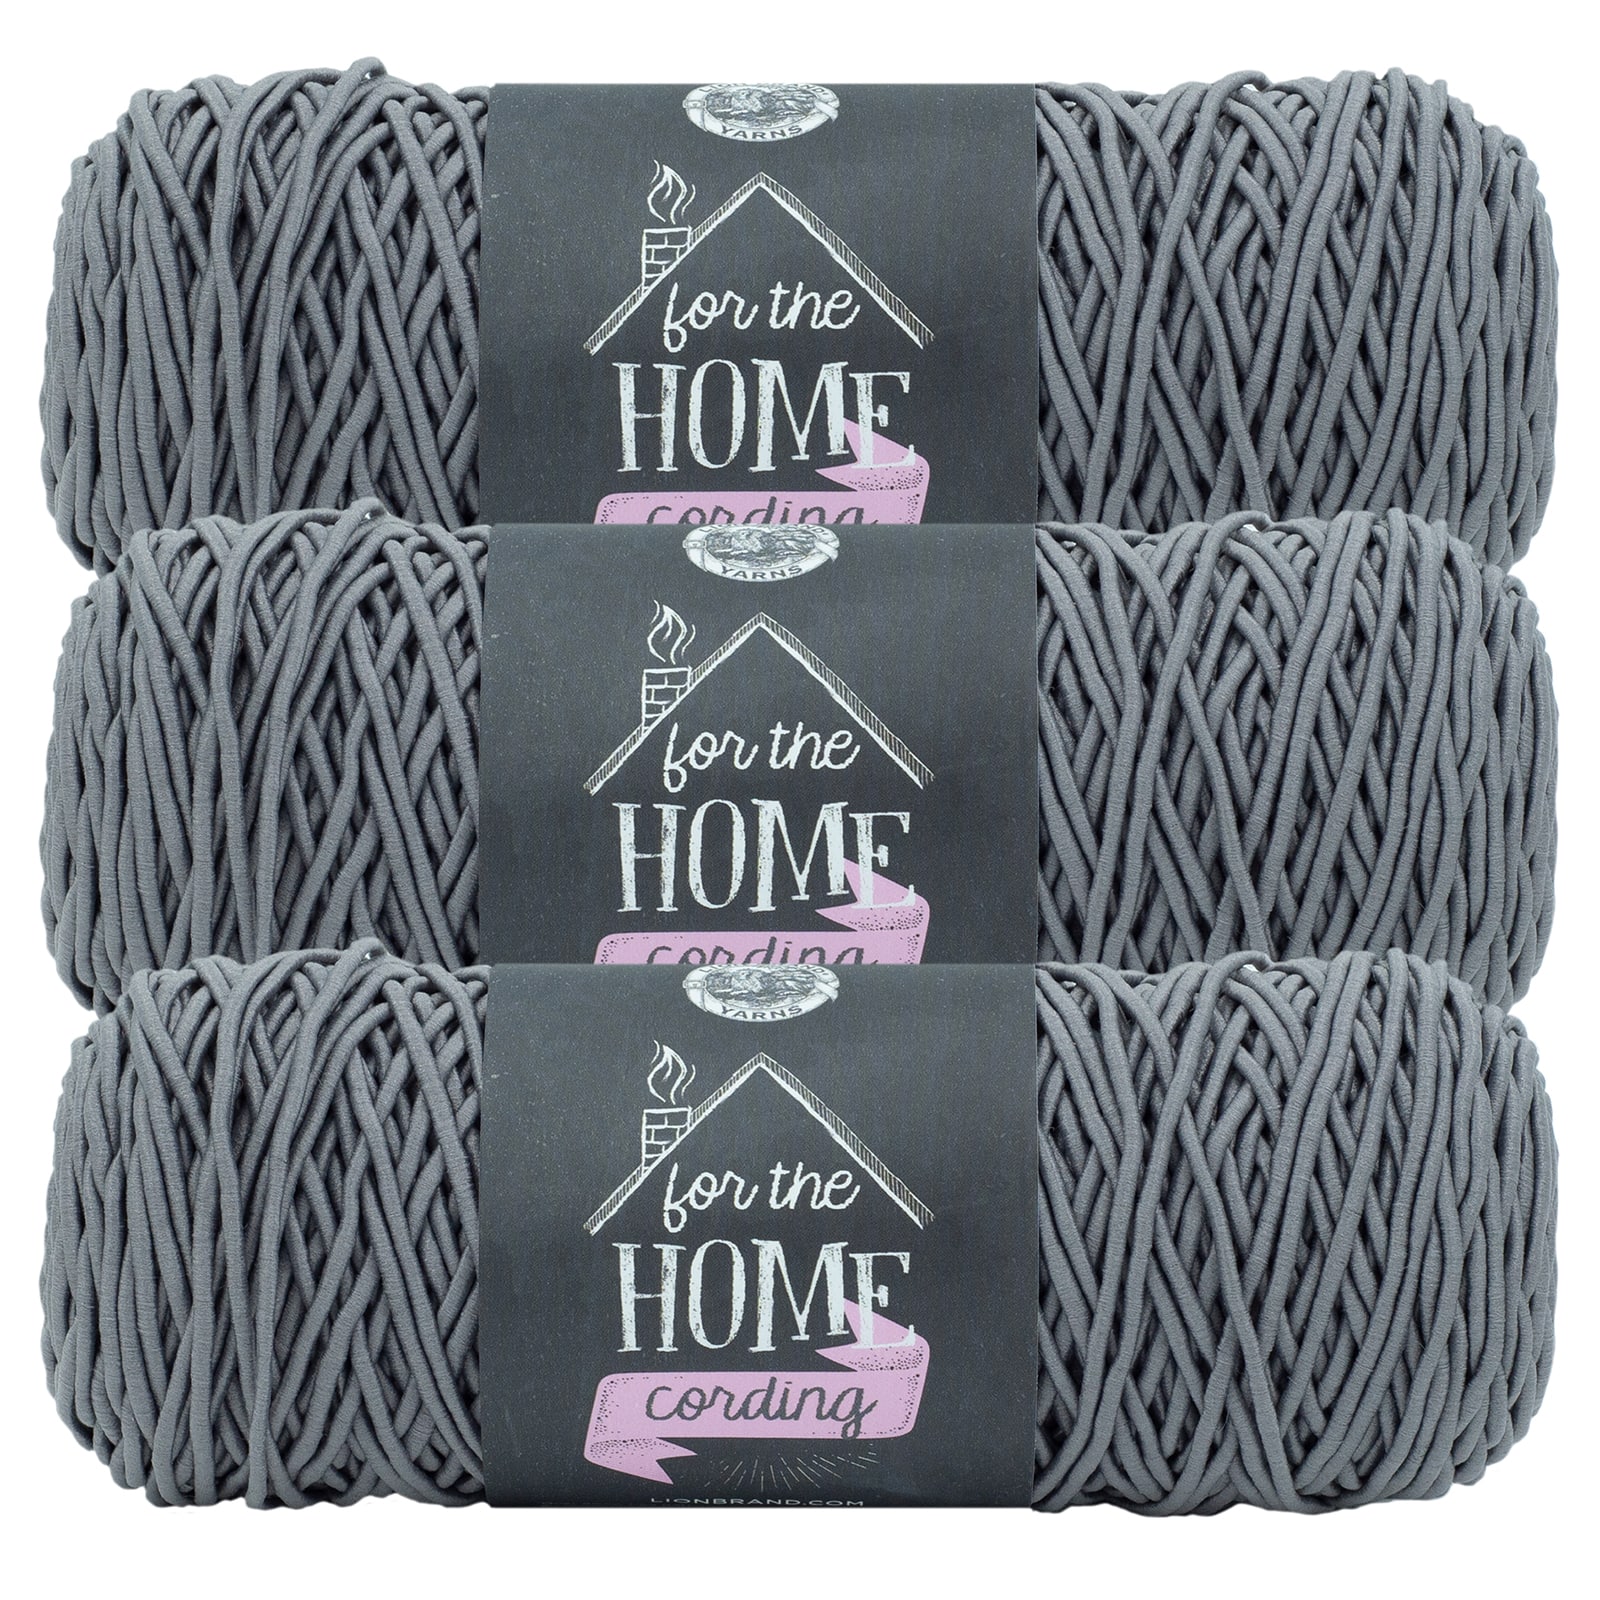 Lion Brand Yarn For the Home Cording Black Medium Recycled Cotton